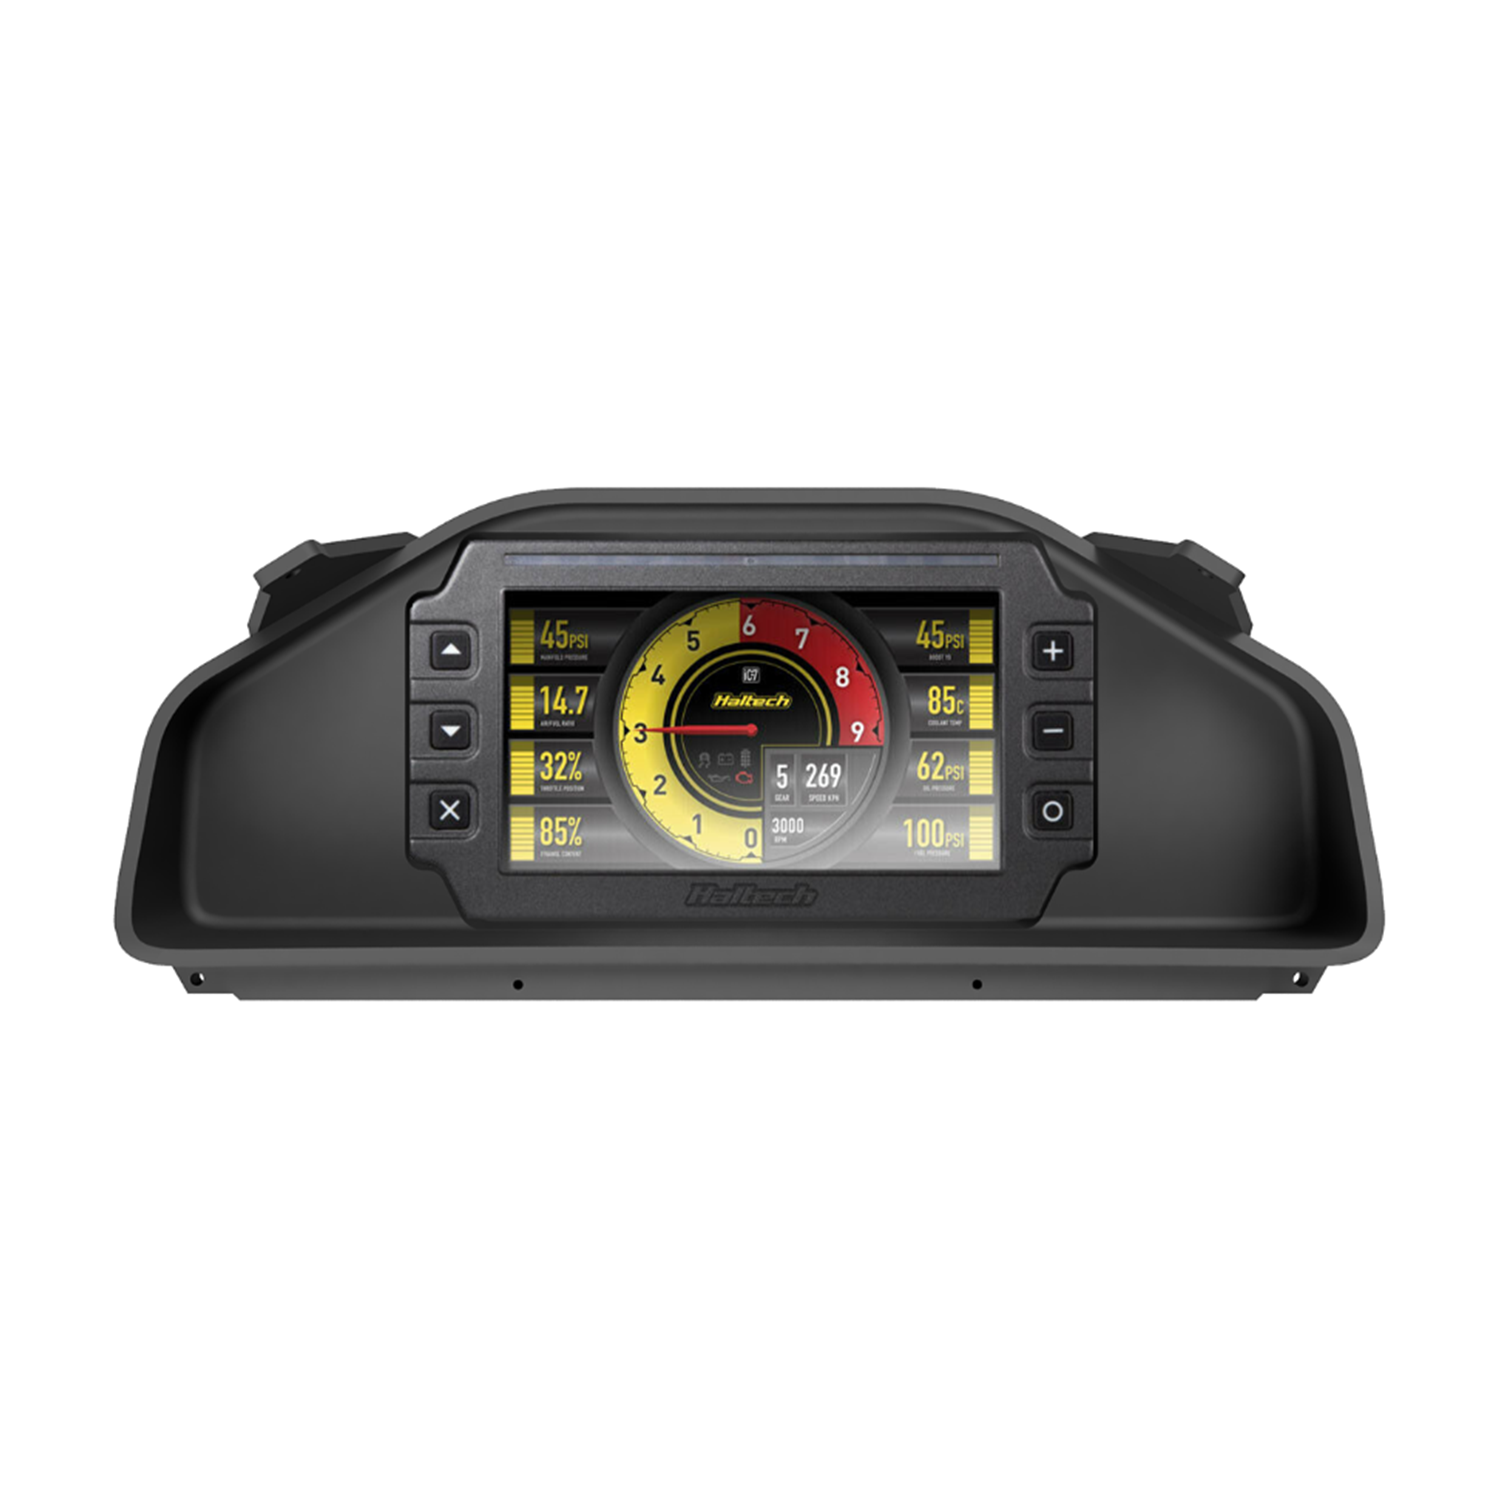 BMW E30 Dash Mount Recessed for the Haltech iC-7 (display not included)